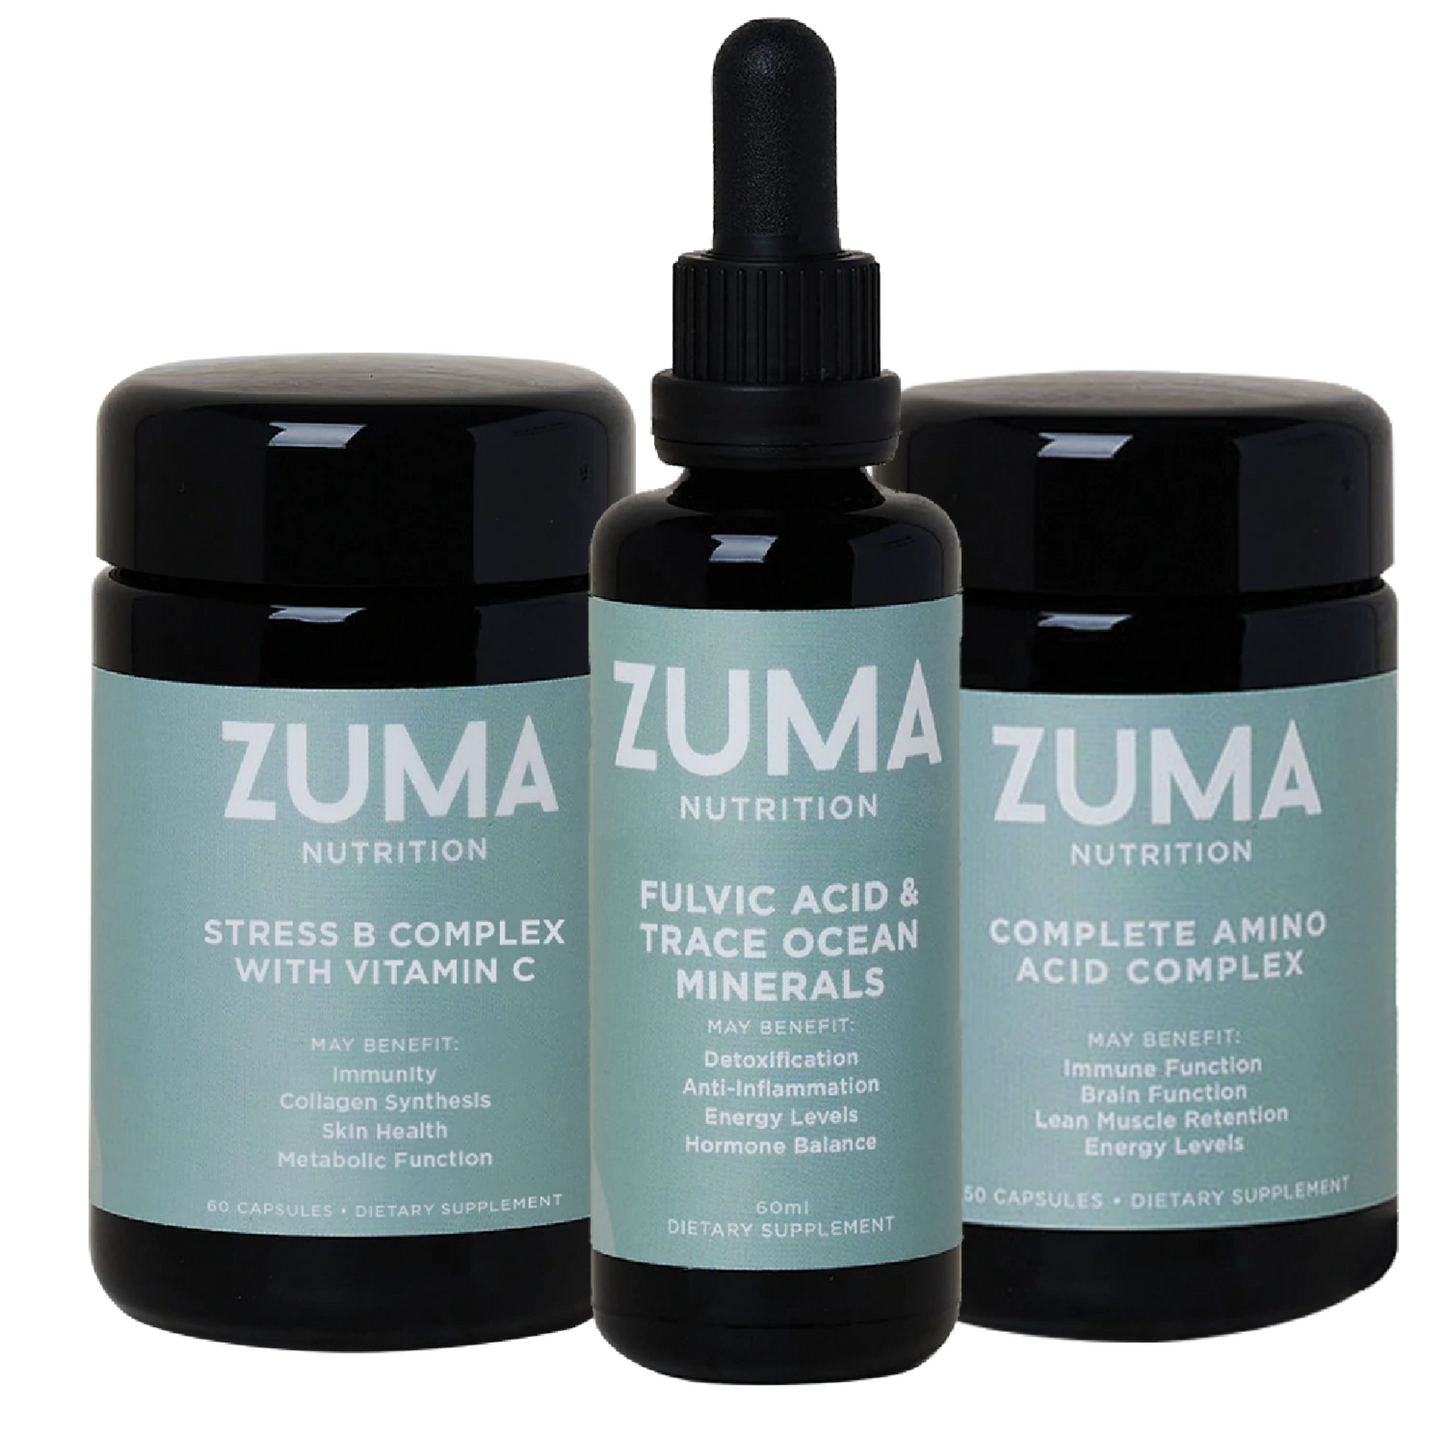 Zuma - Complete Essential Daily Nutrients Protocol